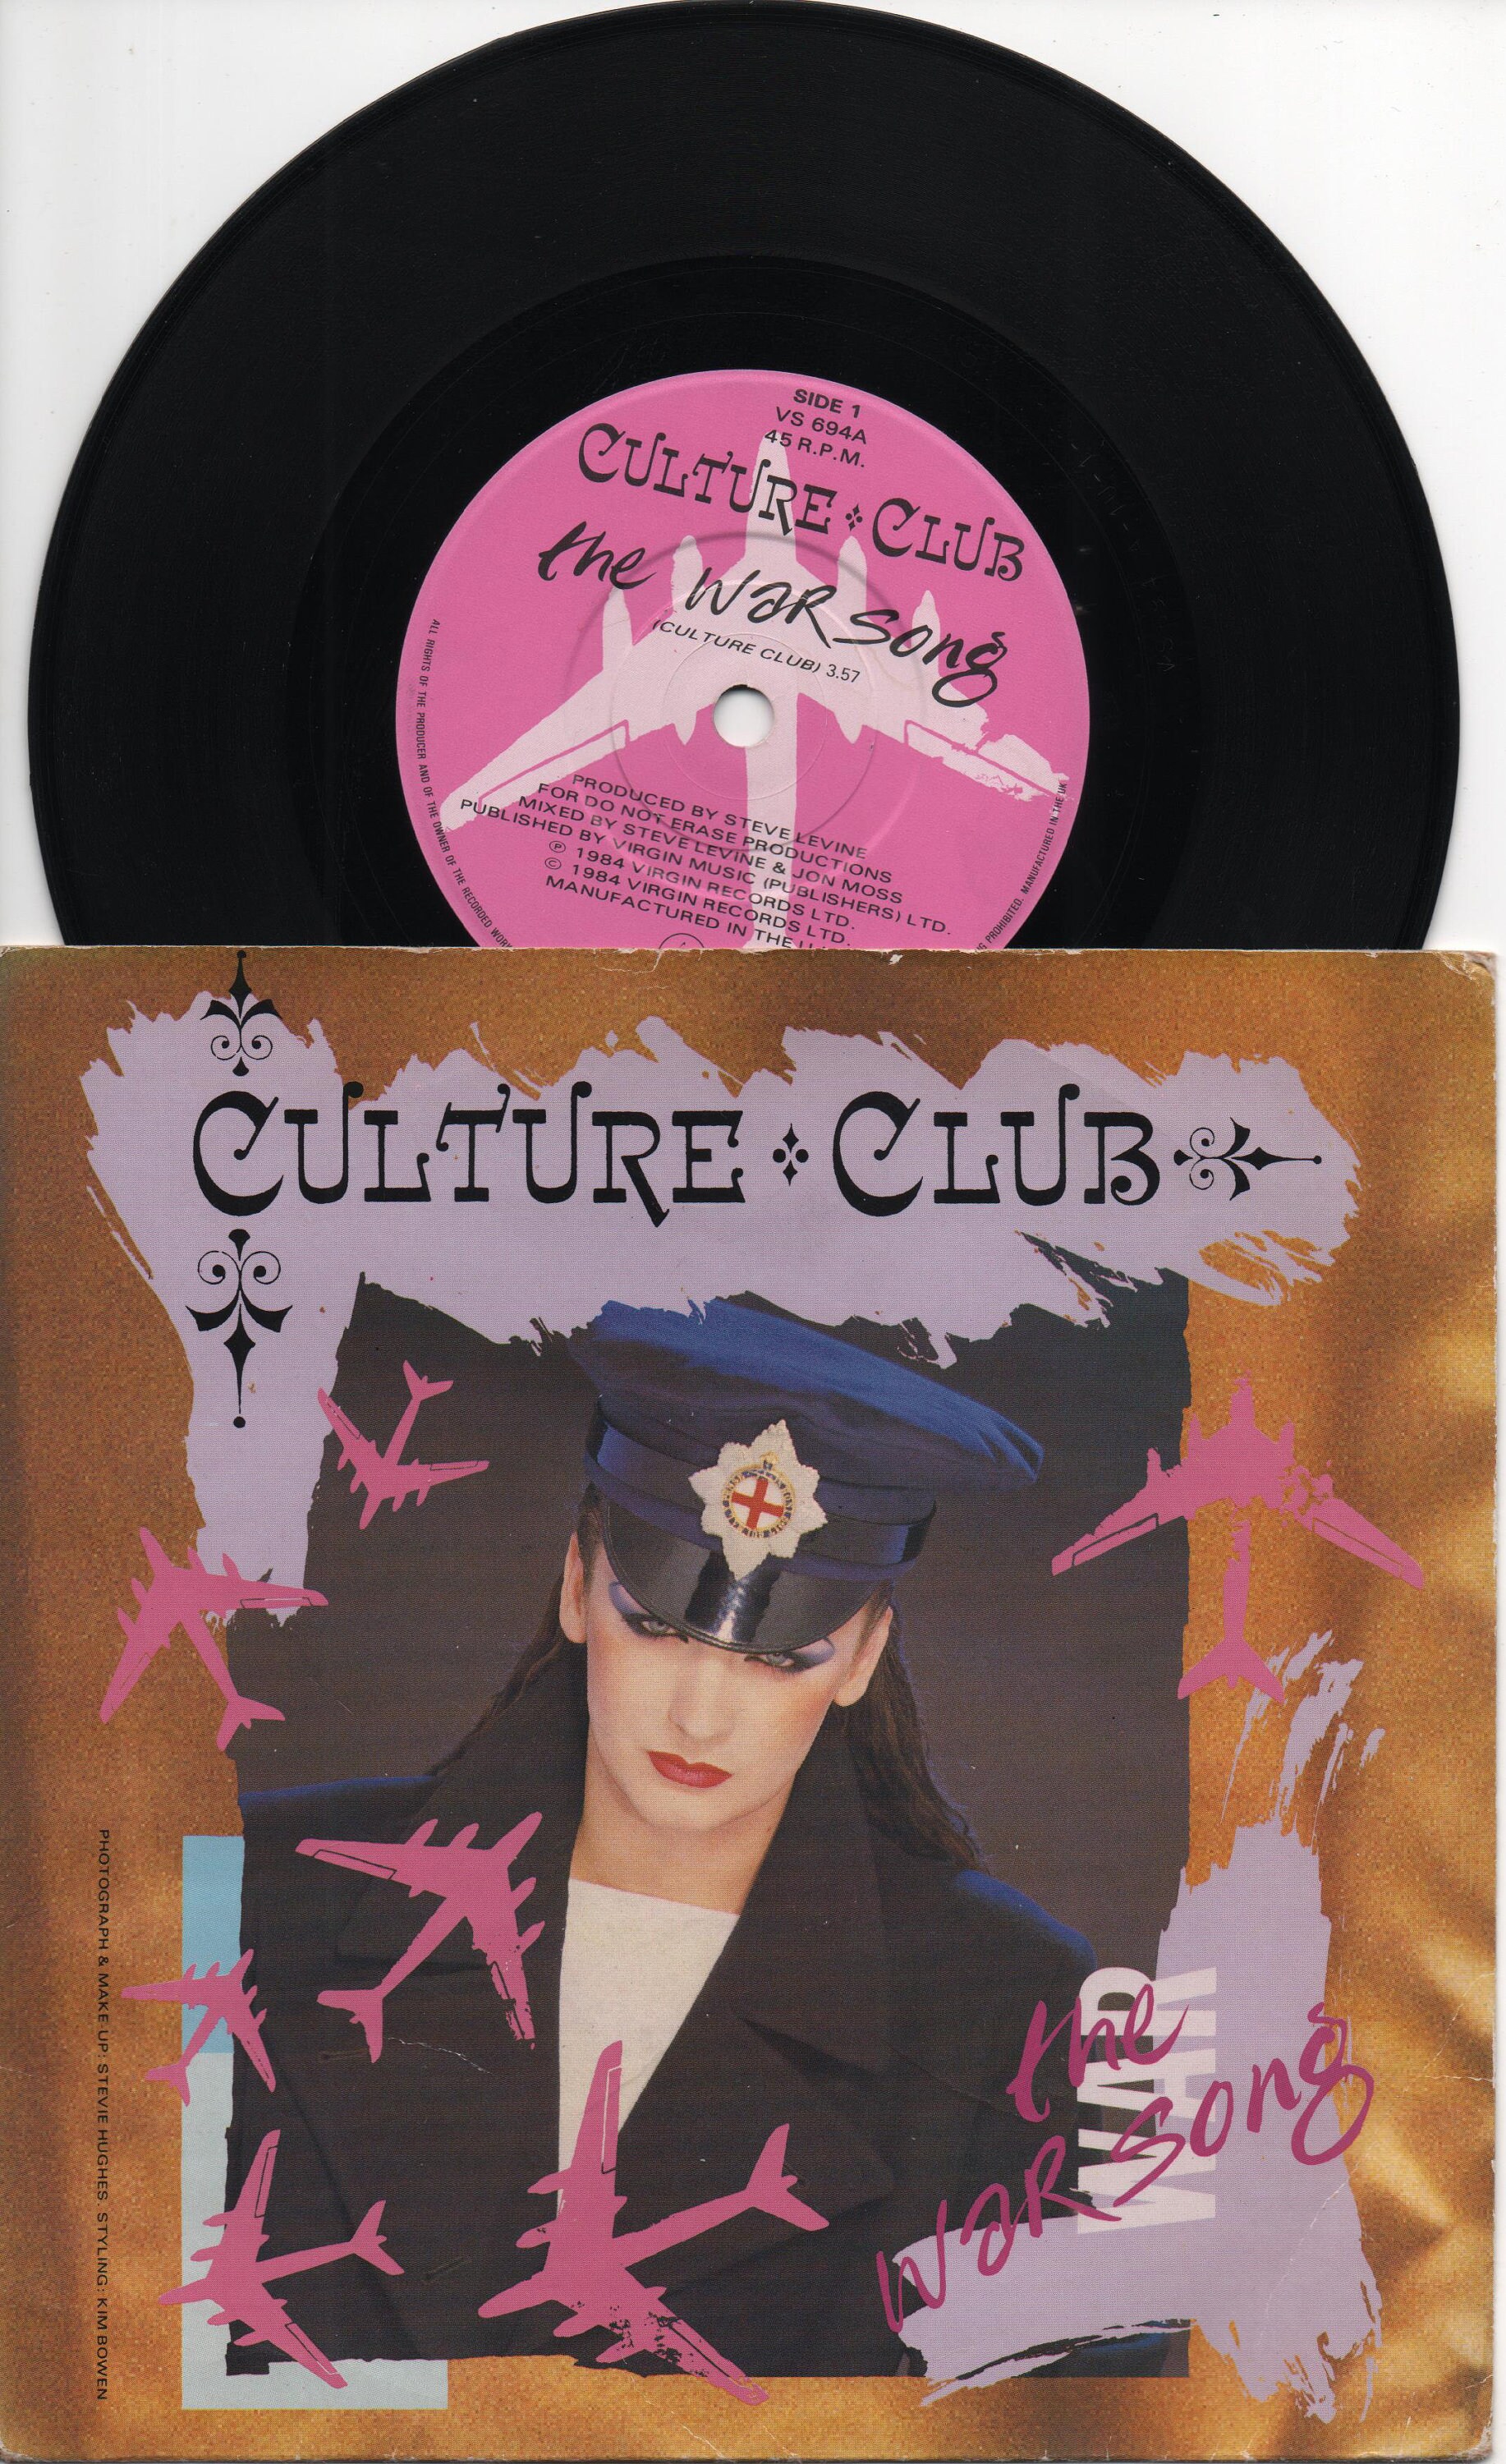 CULTURE CLUB the War Song 1984 UK Issue Original 7 45 - Etsy UK